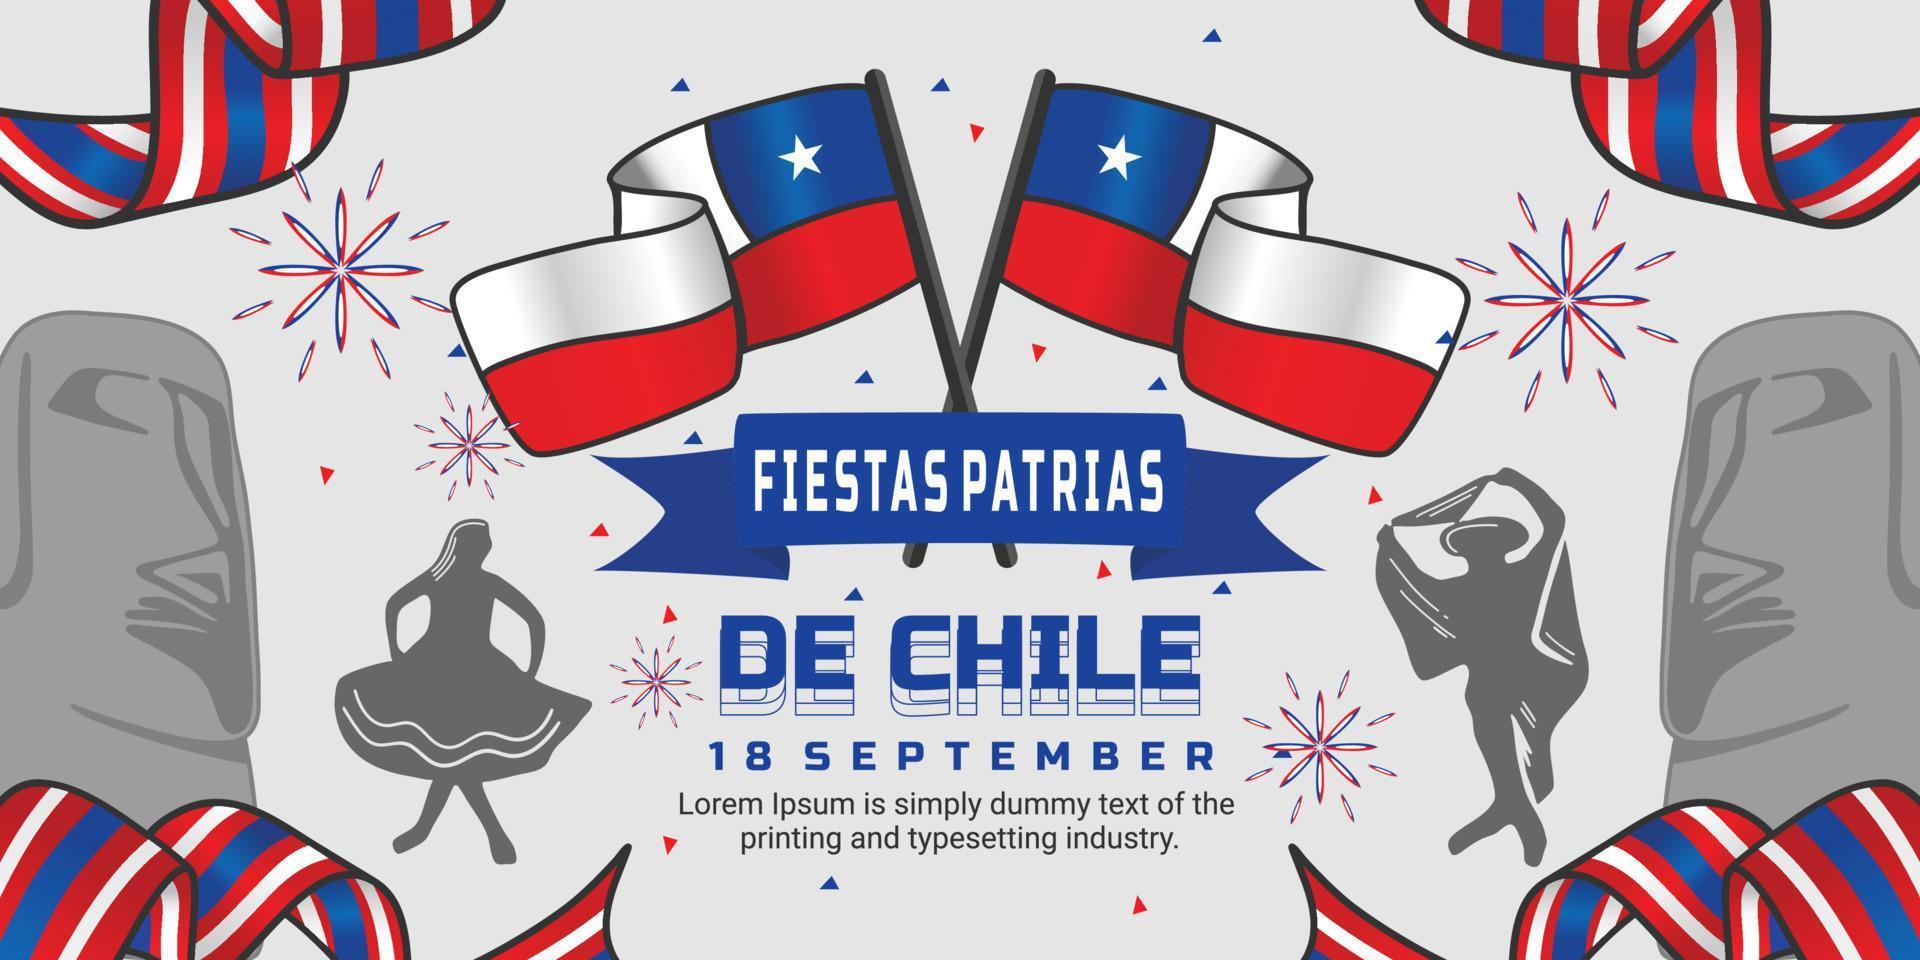 outdoor banner to celebrate Fiesta patrias Chile vector